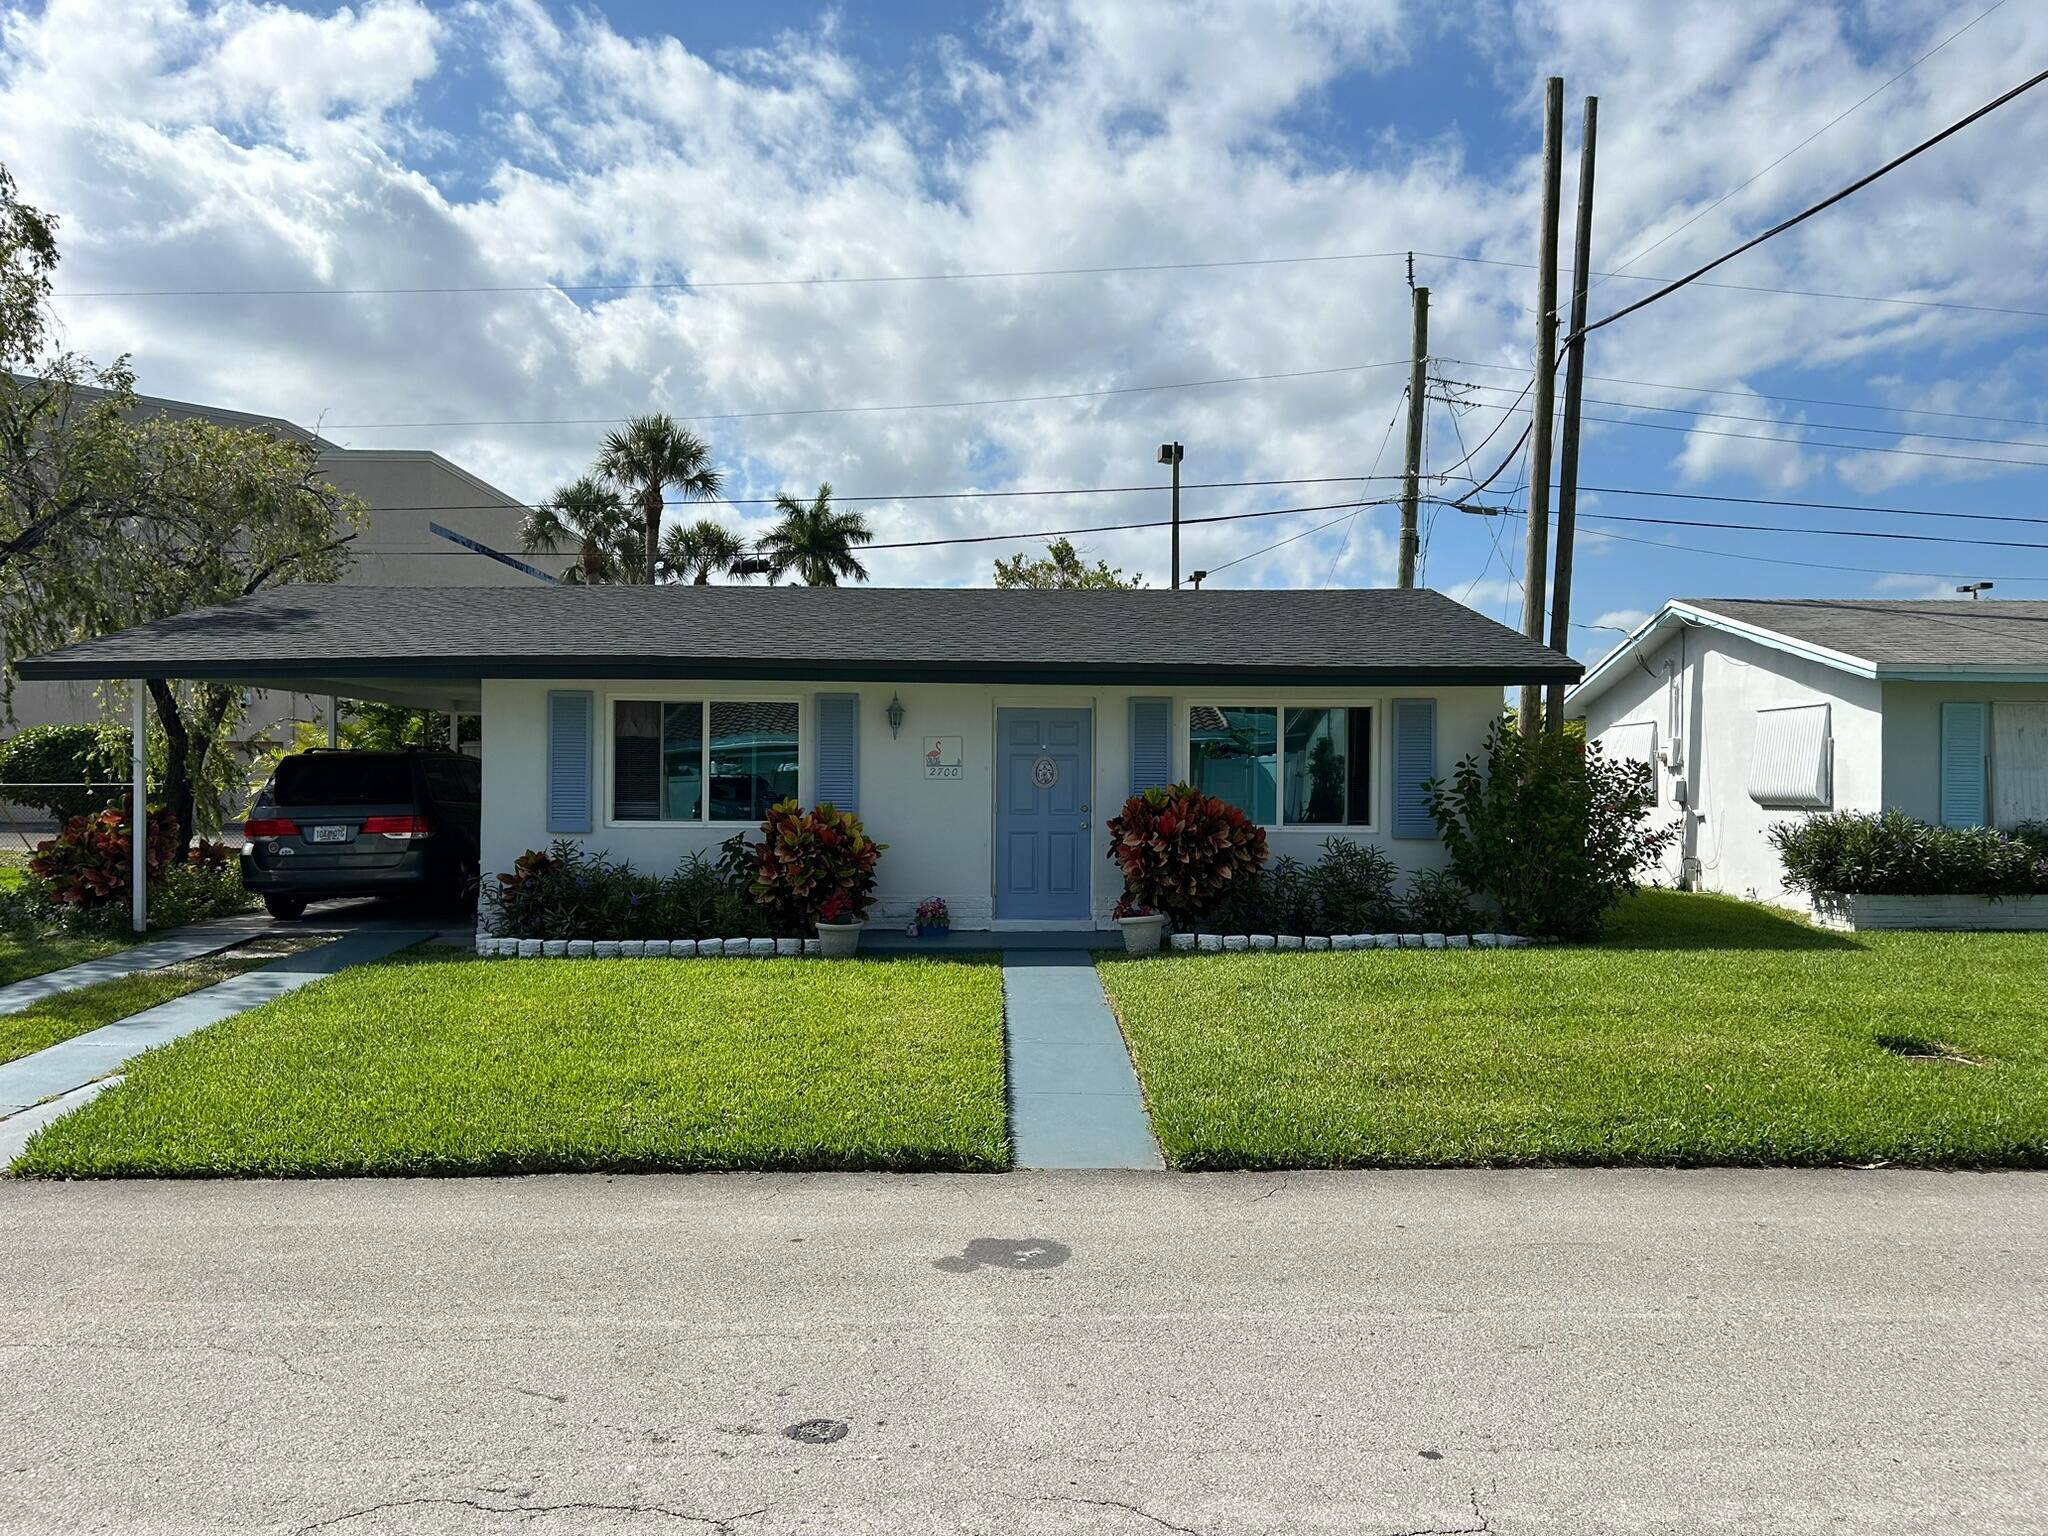 Calling all FIRST tIME HOMEBUYERS, this is a gorgeous two bedroom home priced to sale fast in this quiet neighborhood, that's centrally located to restaurants and shopping.